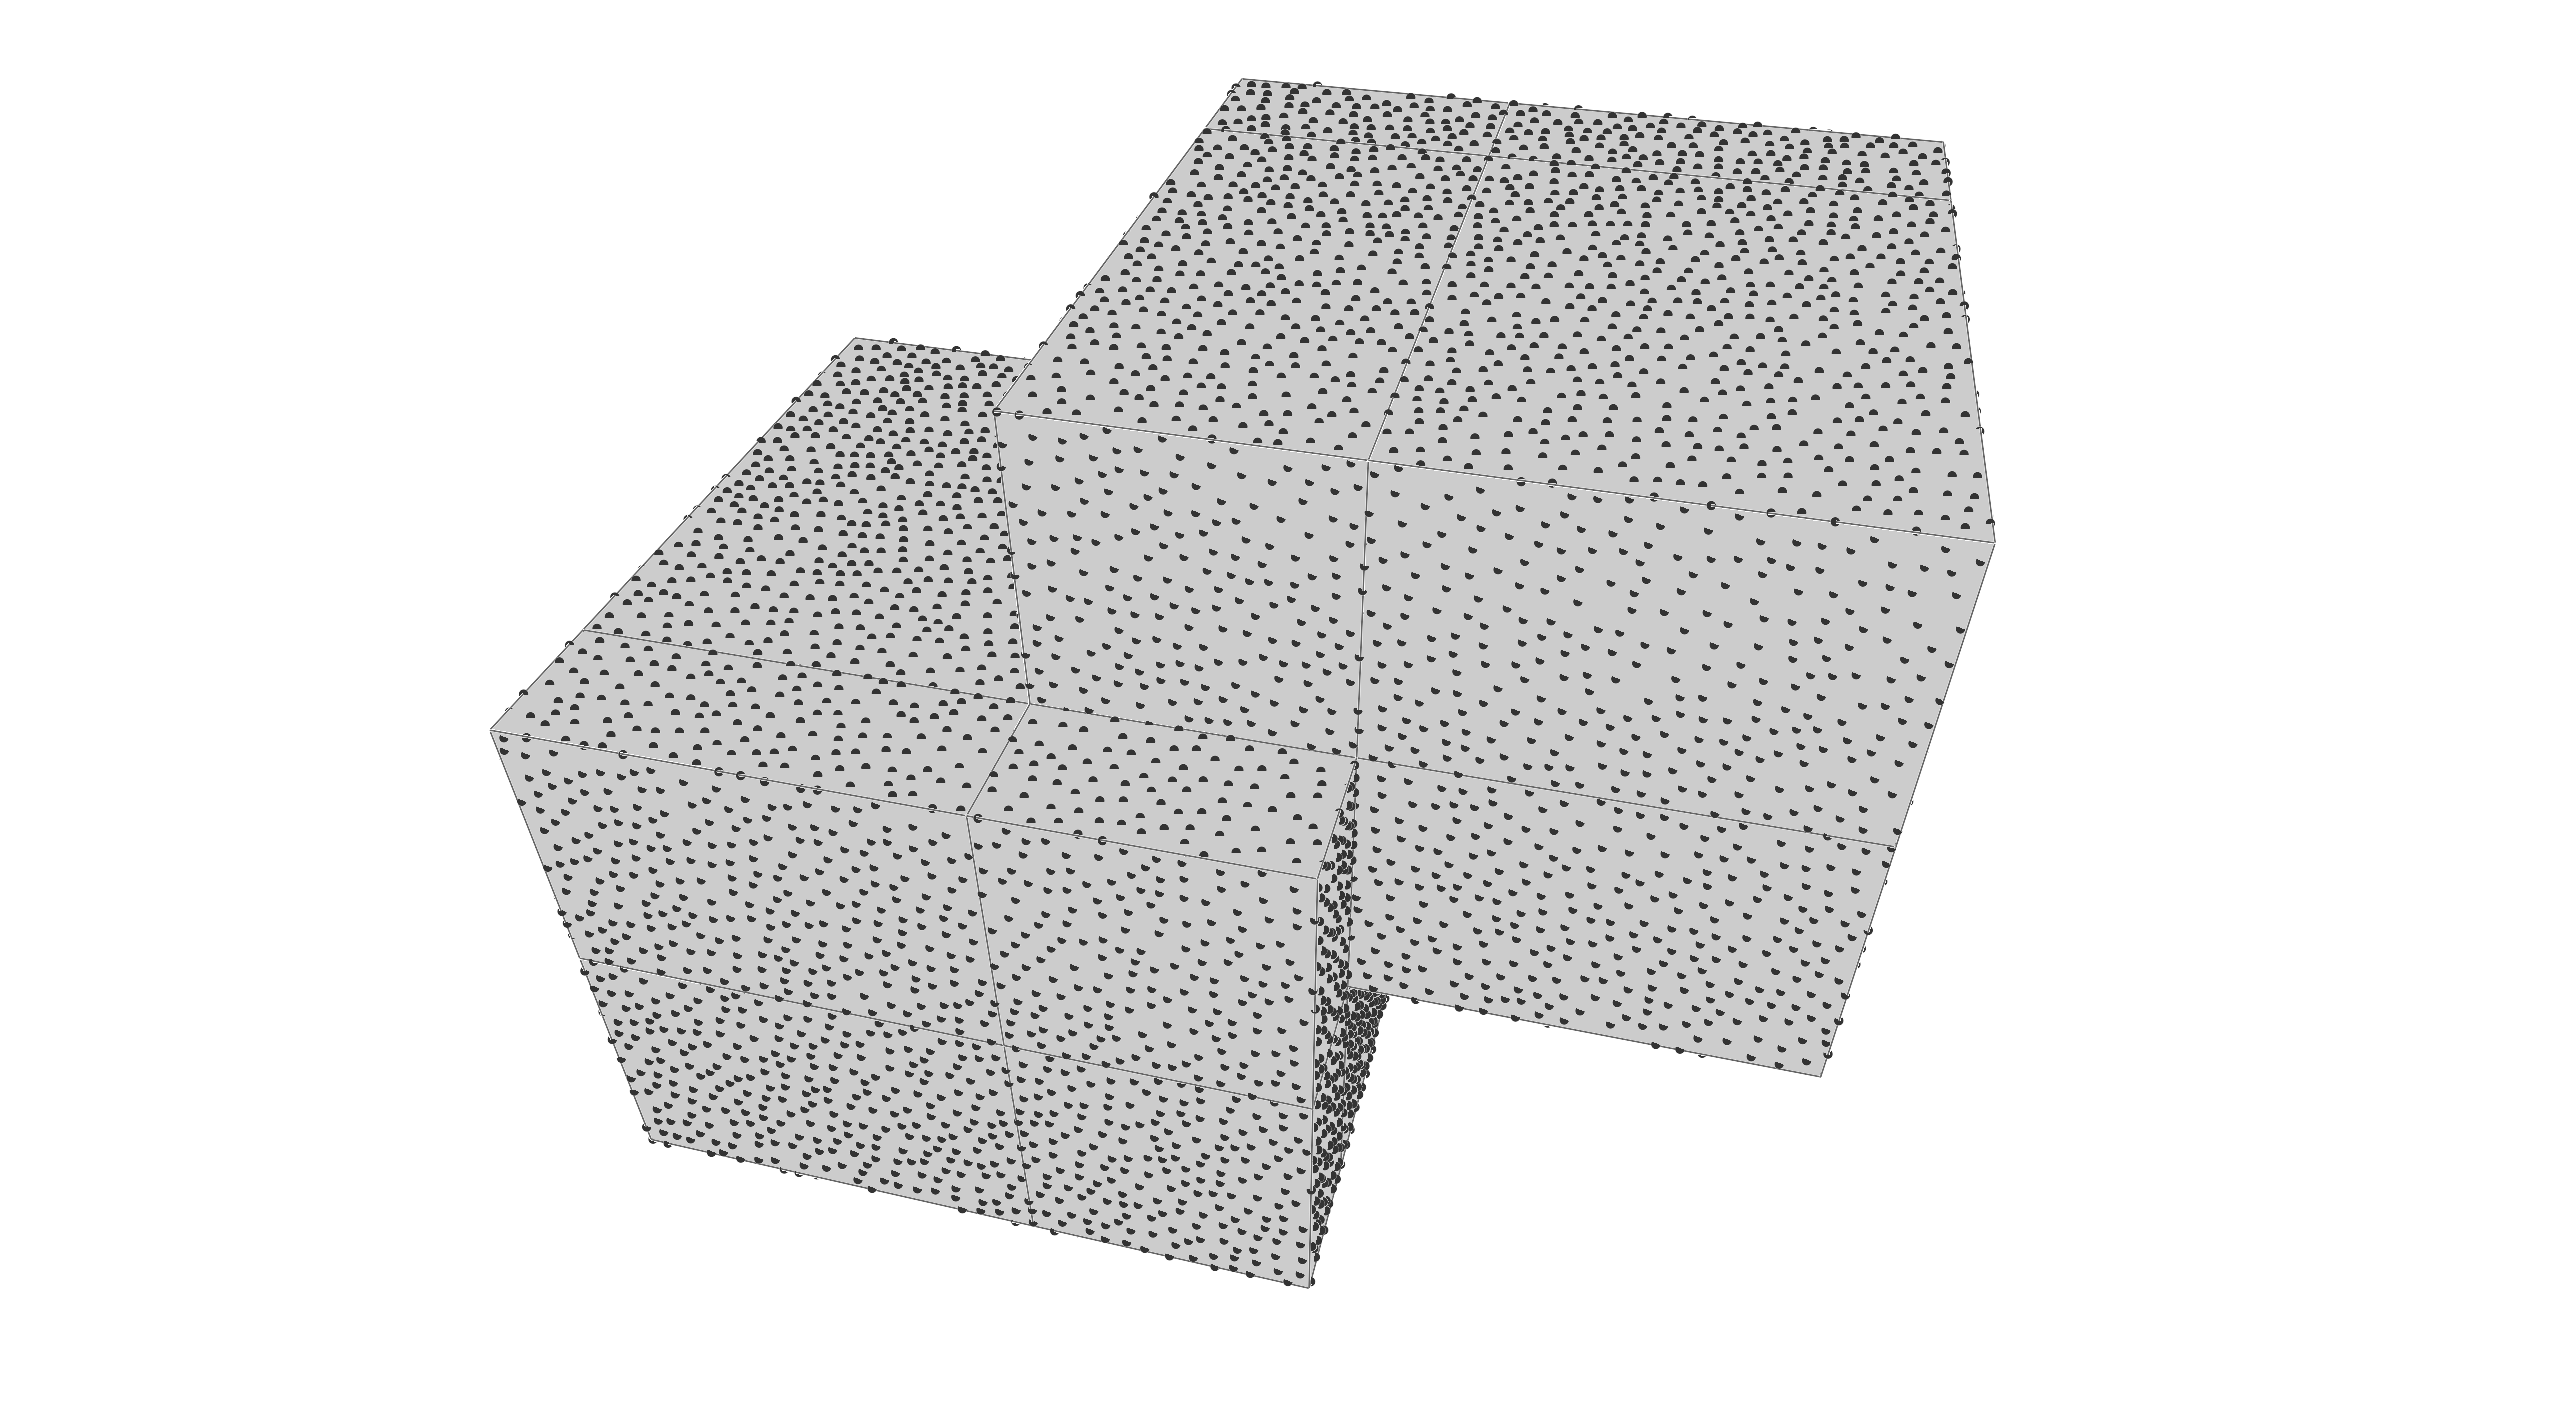 ../_images/cgal_polygonal_surface_reconstruction_ransac.png